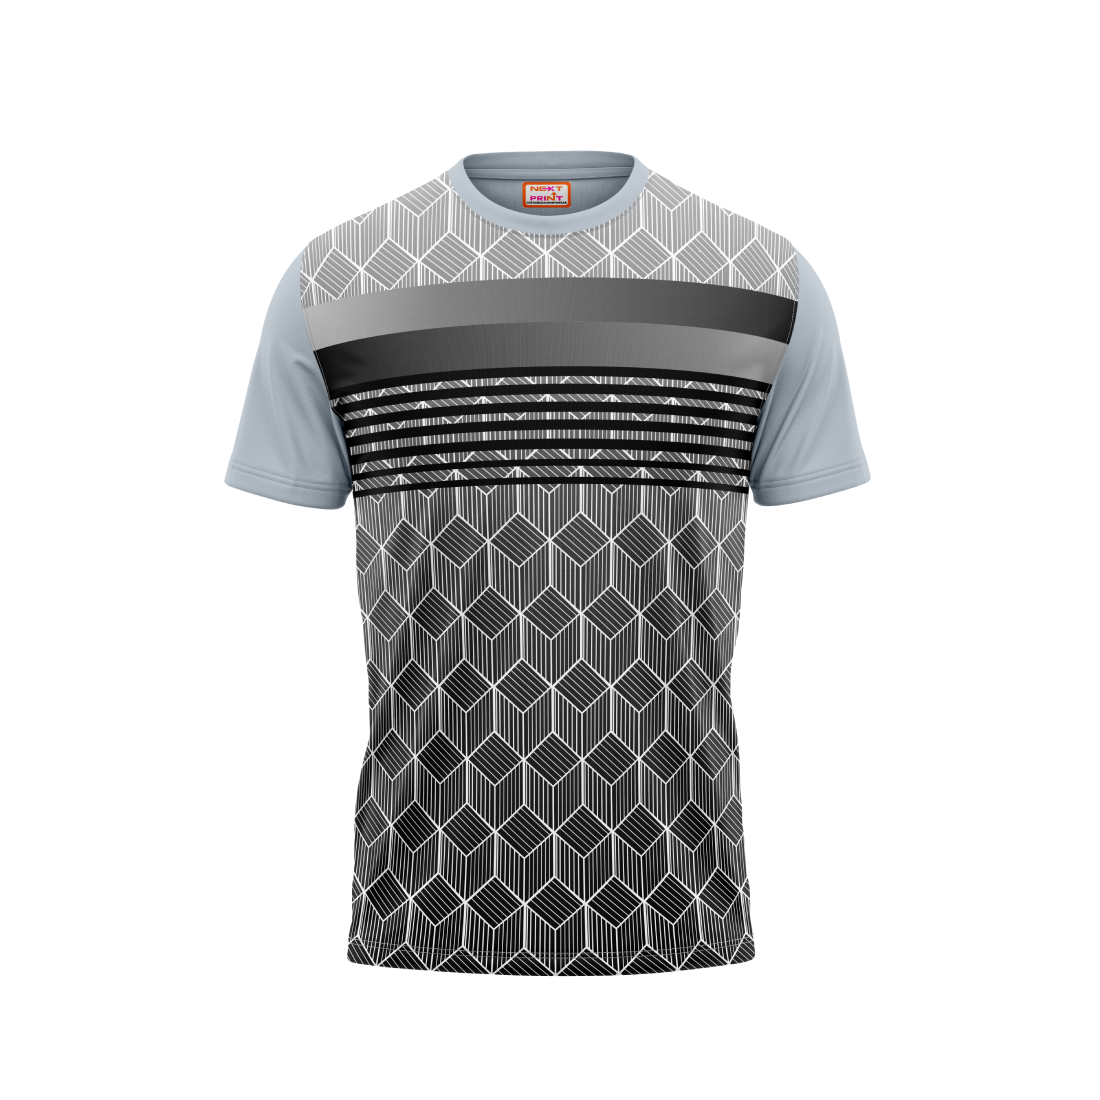 Copy of Round Neck Printed Jersey Grey NP5000050